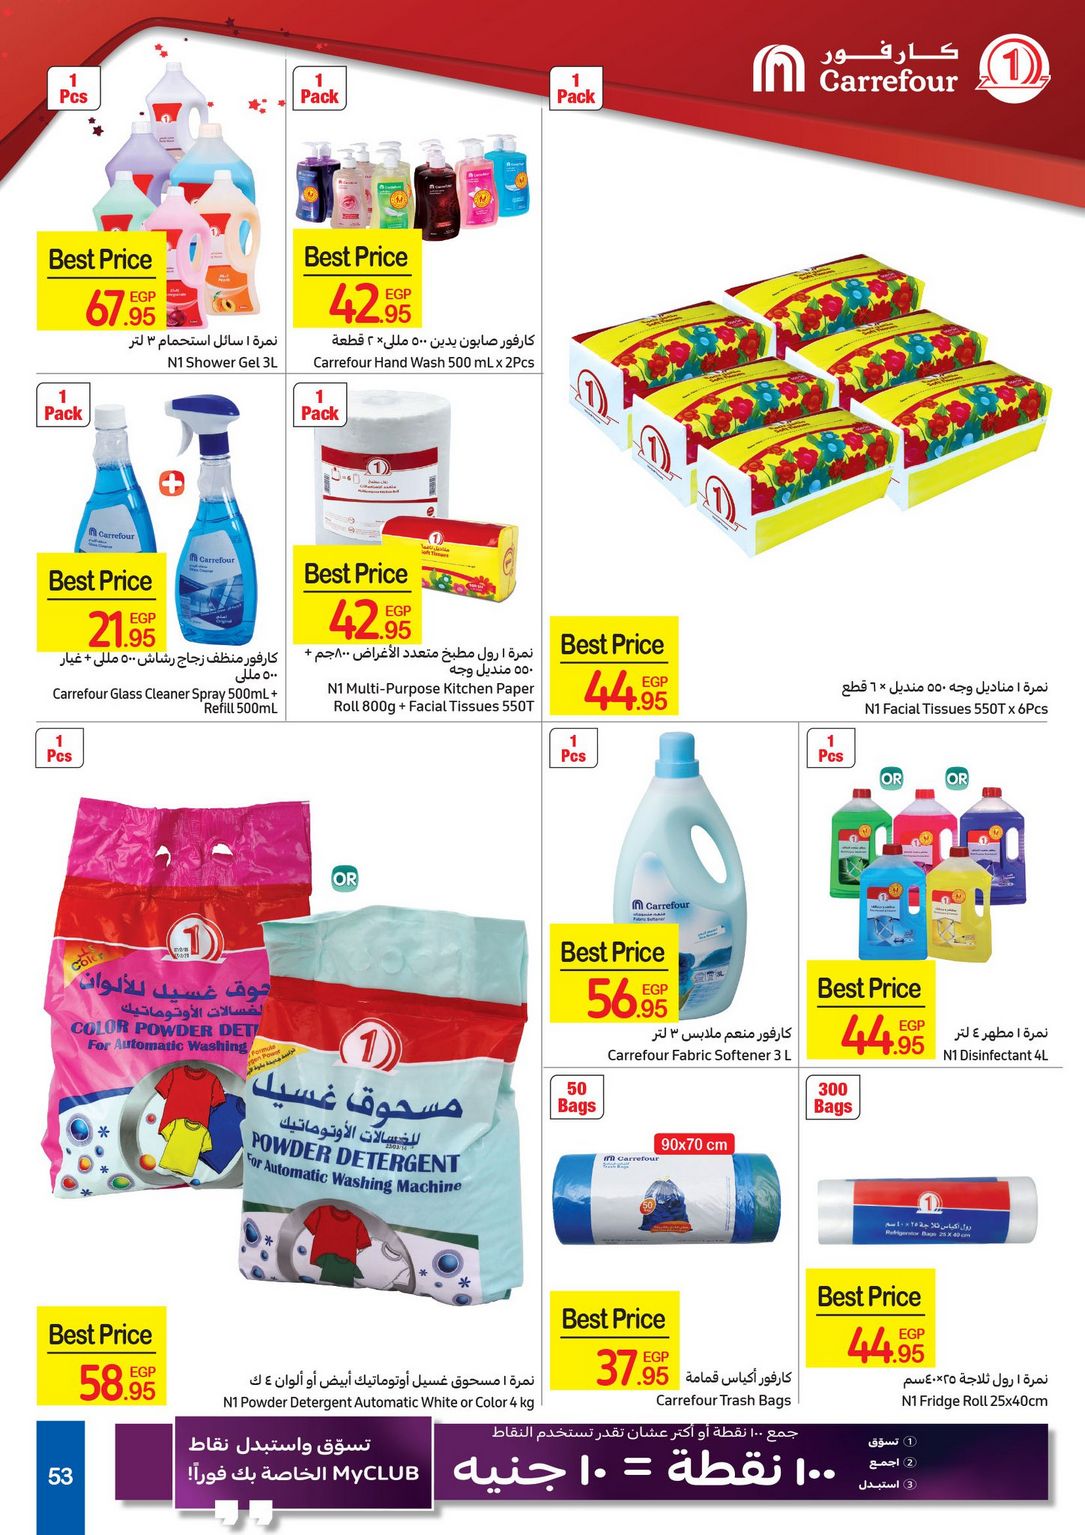 Carrefour Anniversary Offers till 18/2/2021 | Carrefour Egypt 55